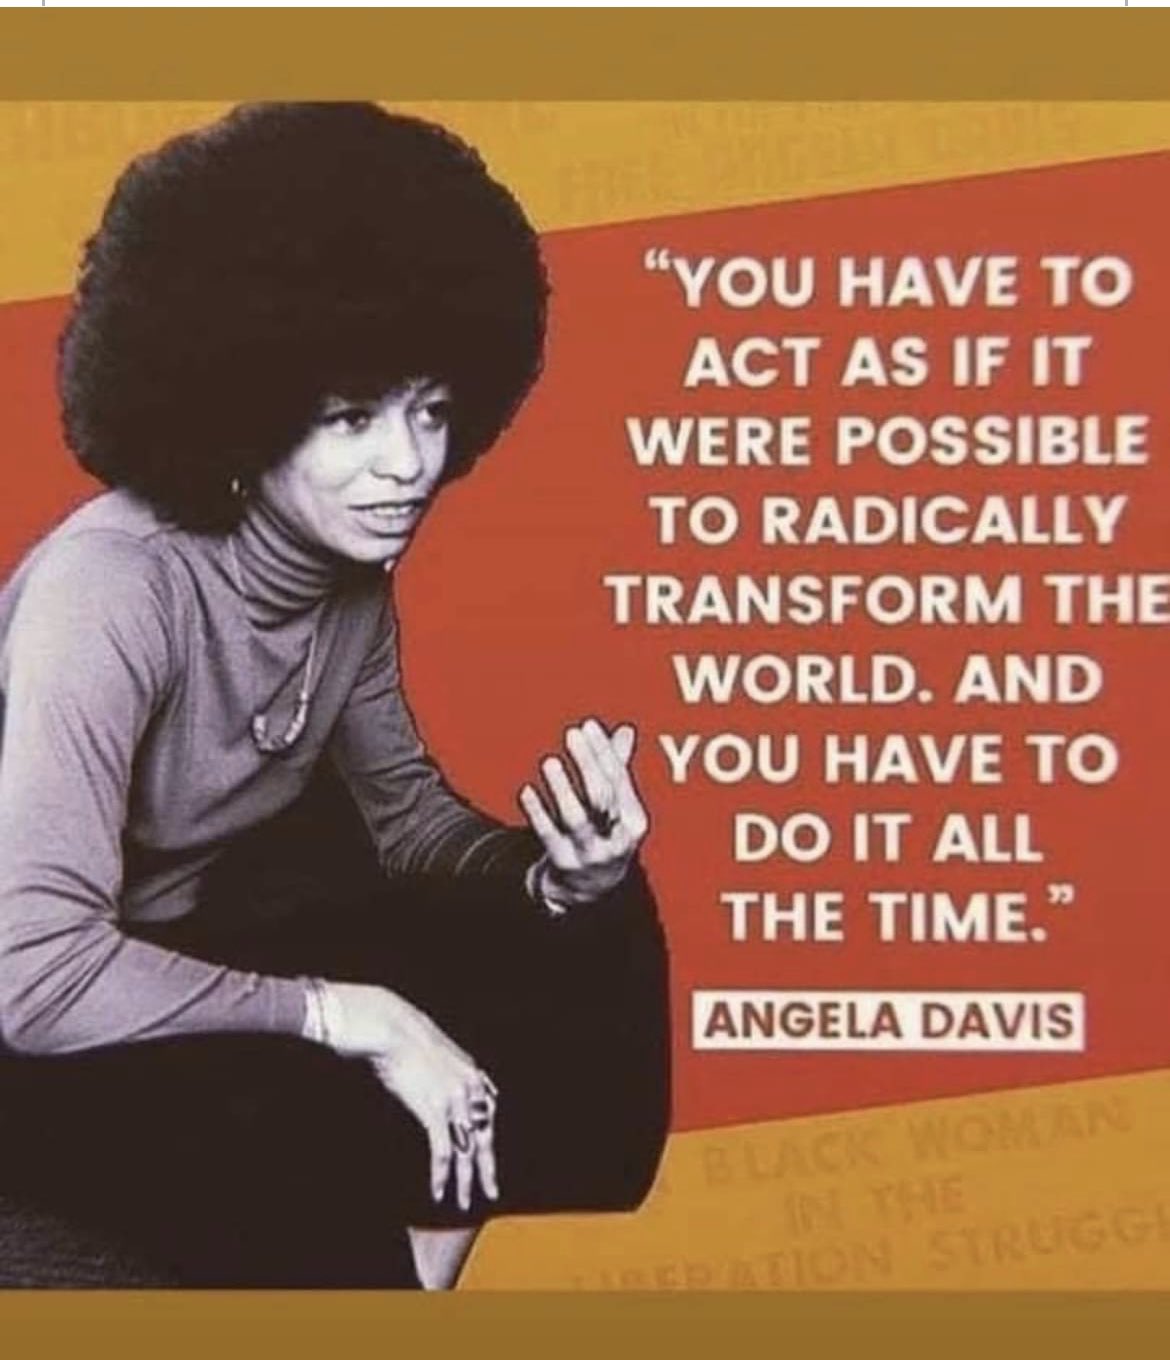 YOU HAVE TO ACT AS IF IT WERE POSSIBLE TO RADICALLY TRANSFORM THE WORLD. AND YOU HAVE TO DO IT ALL THE TIME. - Angela Davis